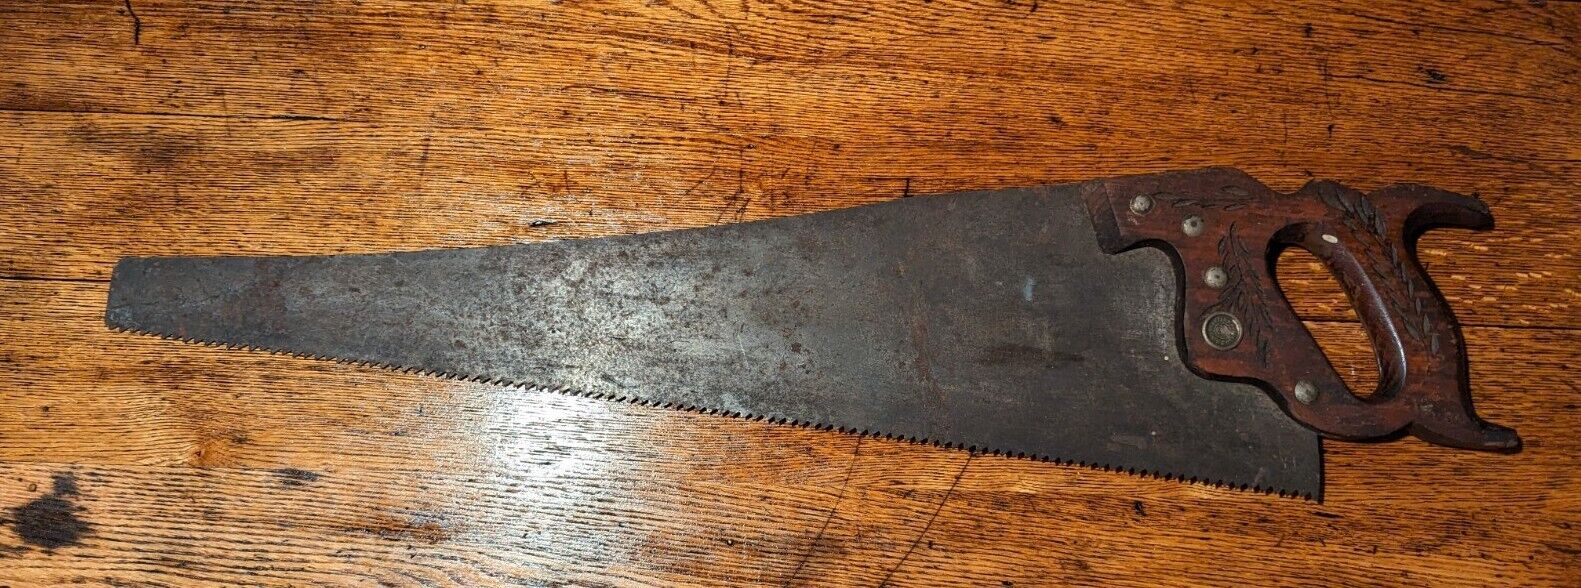 Disston Challenger Rip Saw 26 inches 4 TPI Made in USA Pennsylvania Vintage